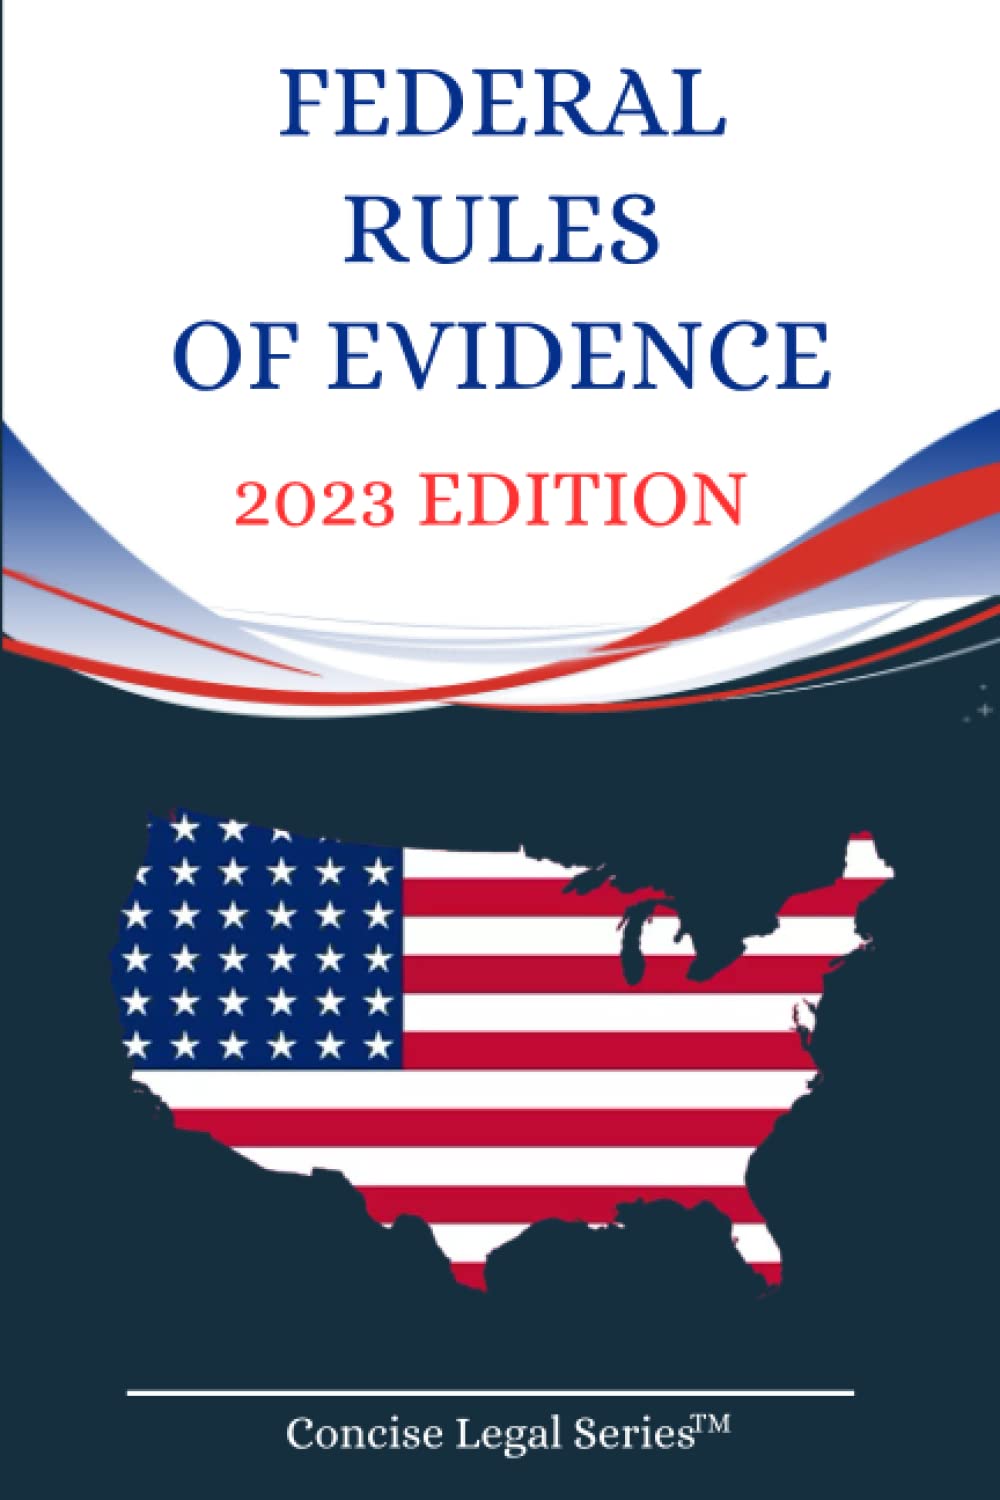 Federal Rules of Evidence Booklet